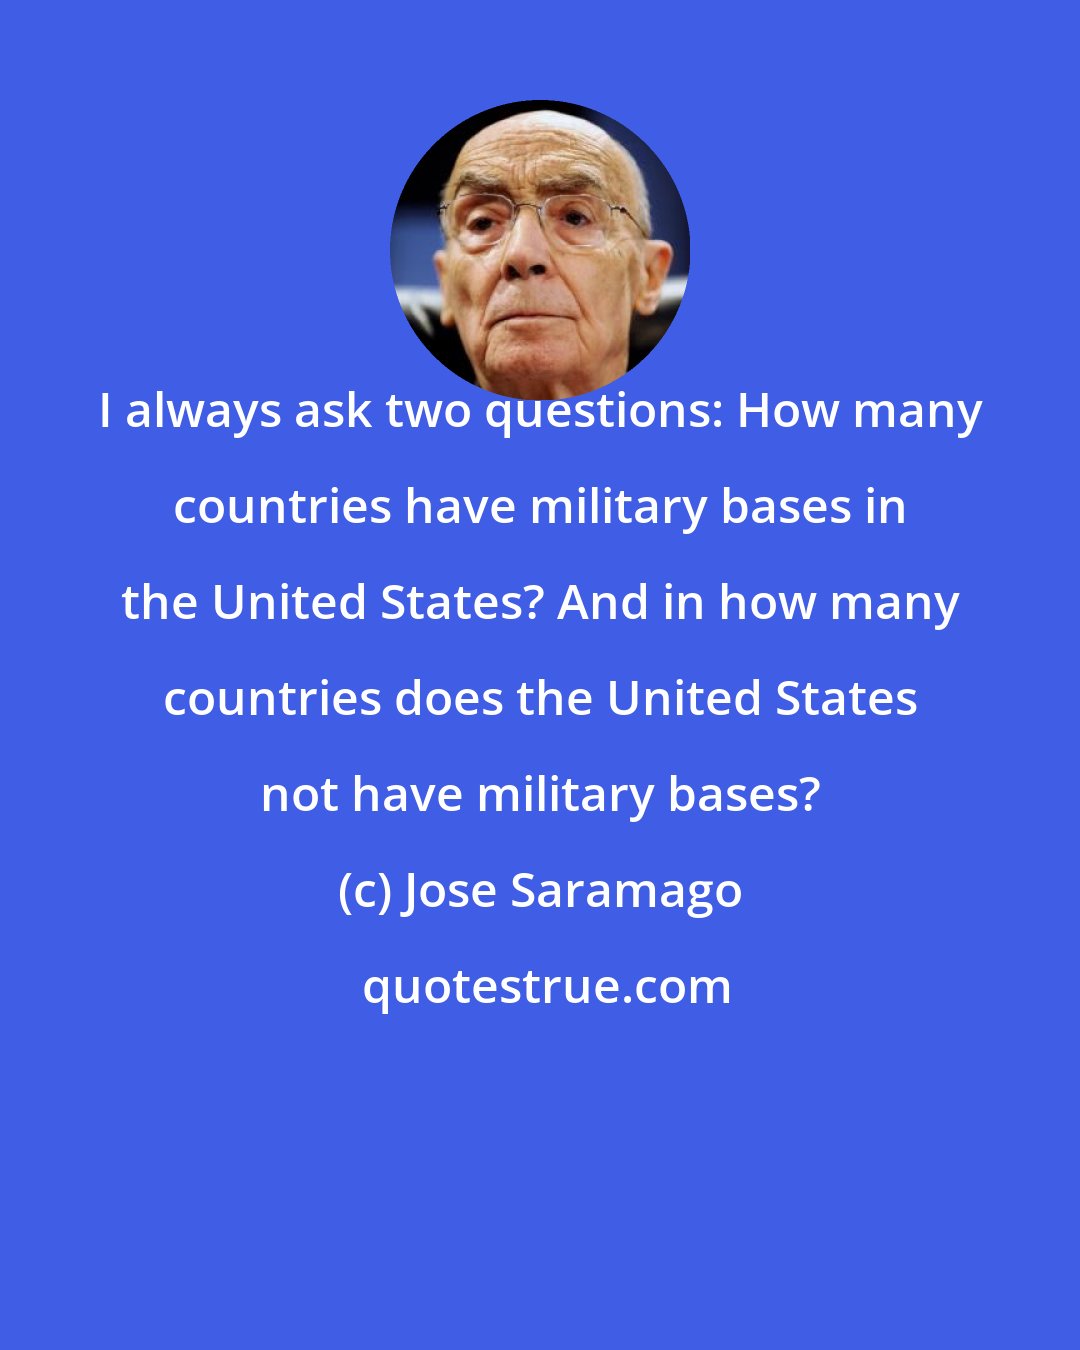 Jose Saramago: I always ask two questions: How many countries have military bases in the United States? And in how many countries does the United States not have military bases?